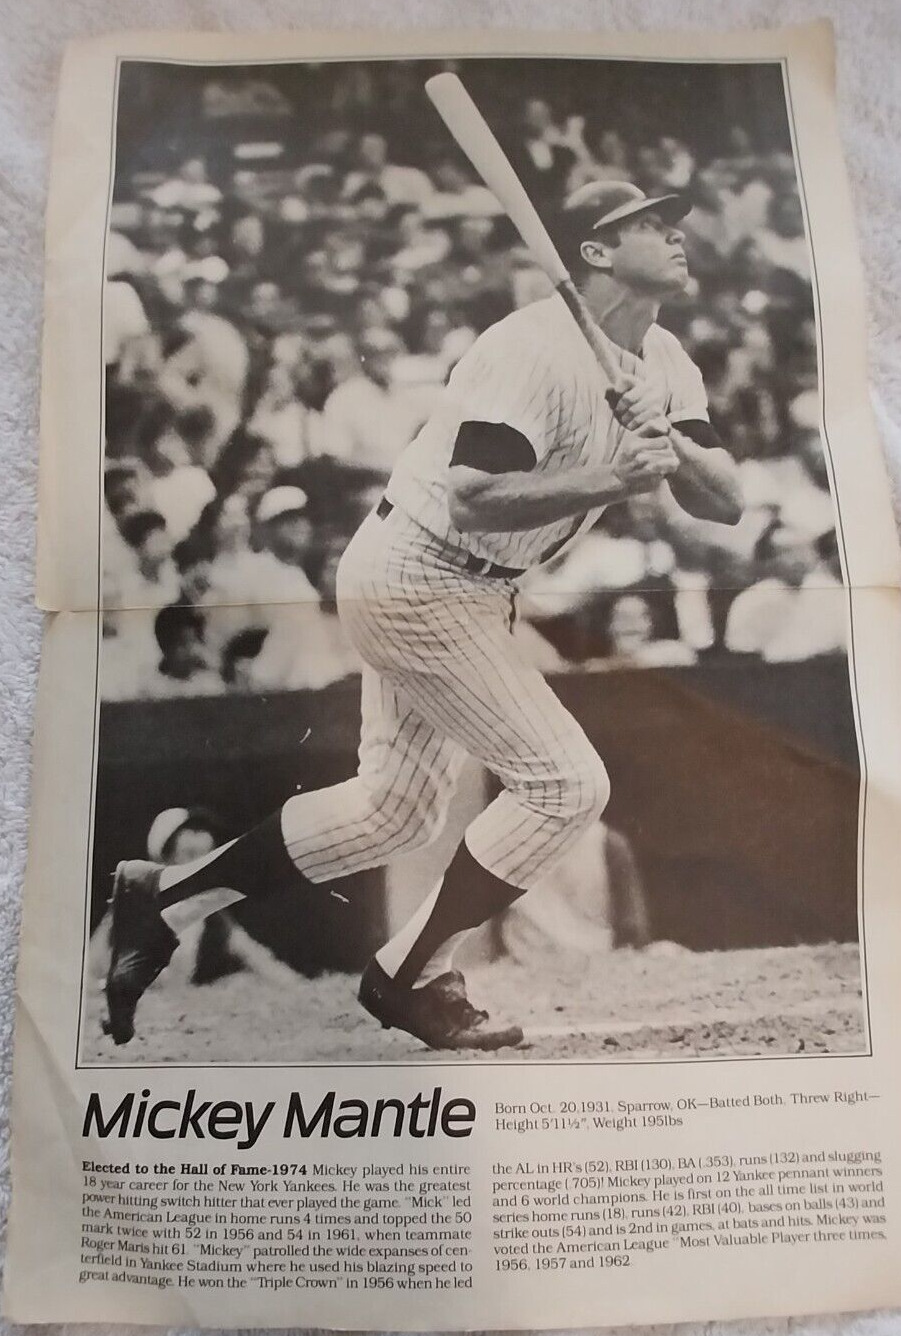 1975 New York Yankee baseball star MICKEY MANTLE Newspaper Page from Hall of Fam